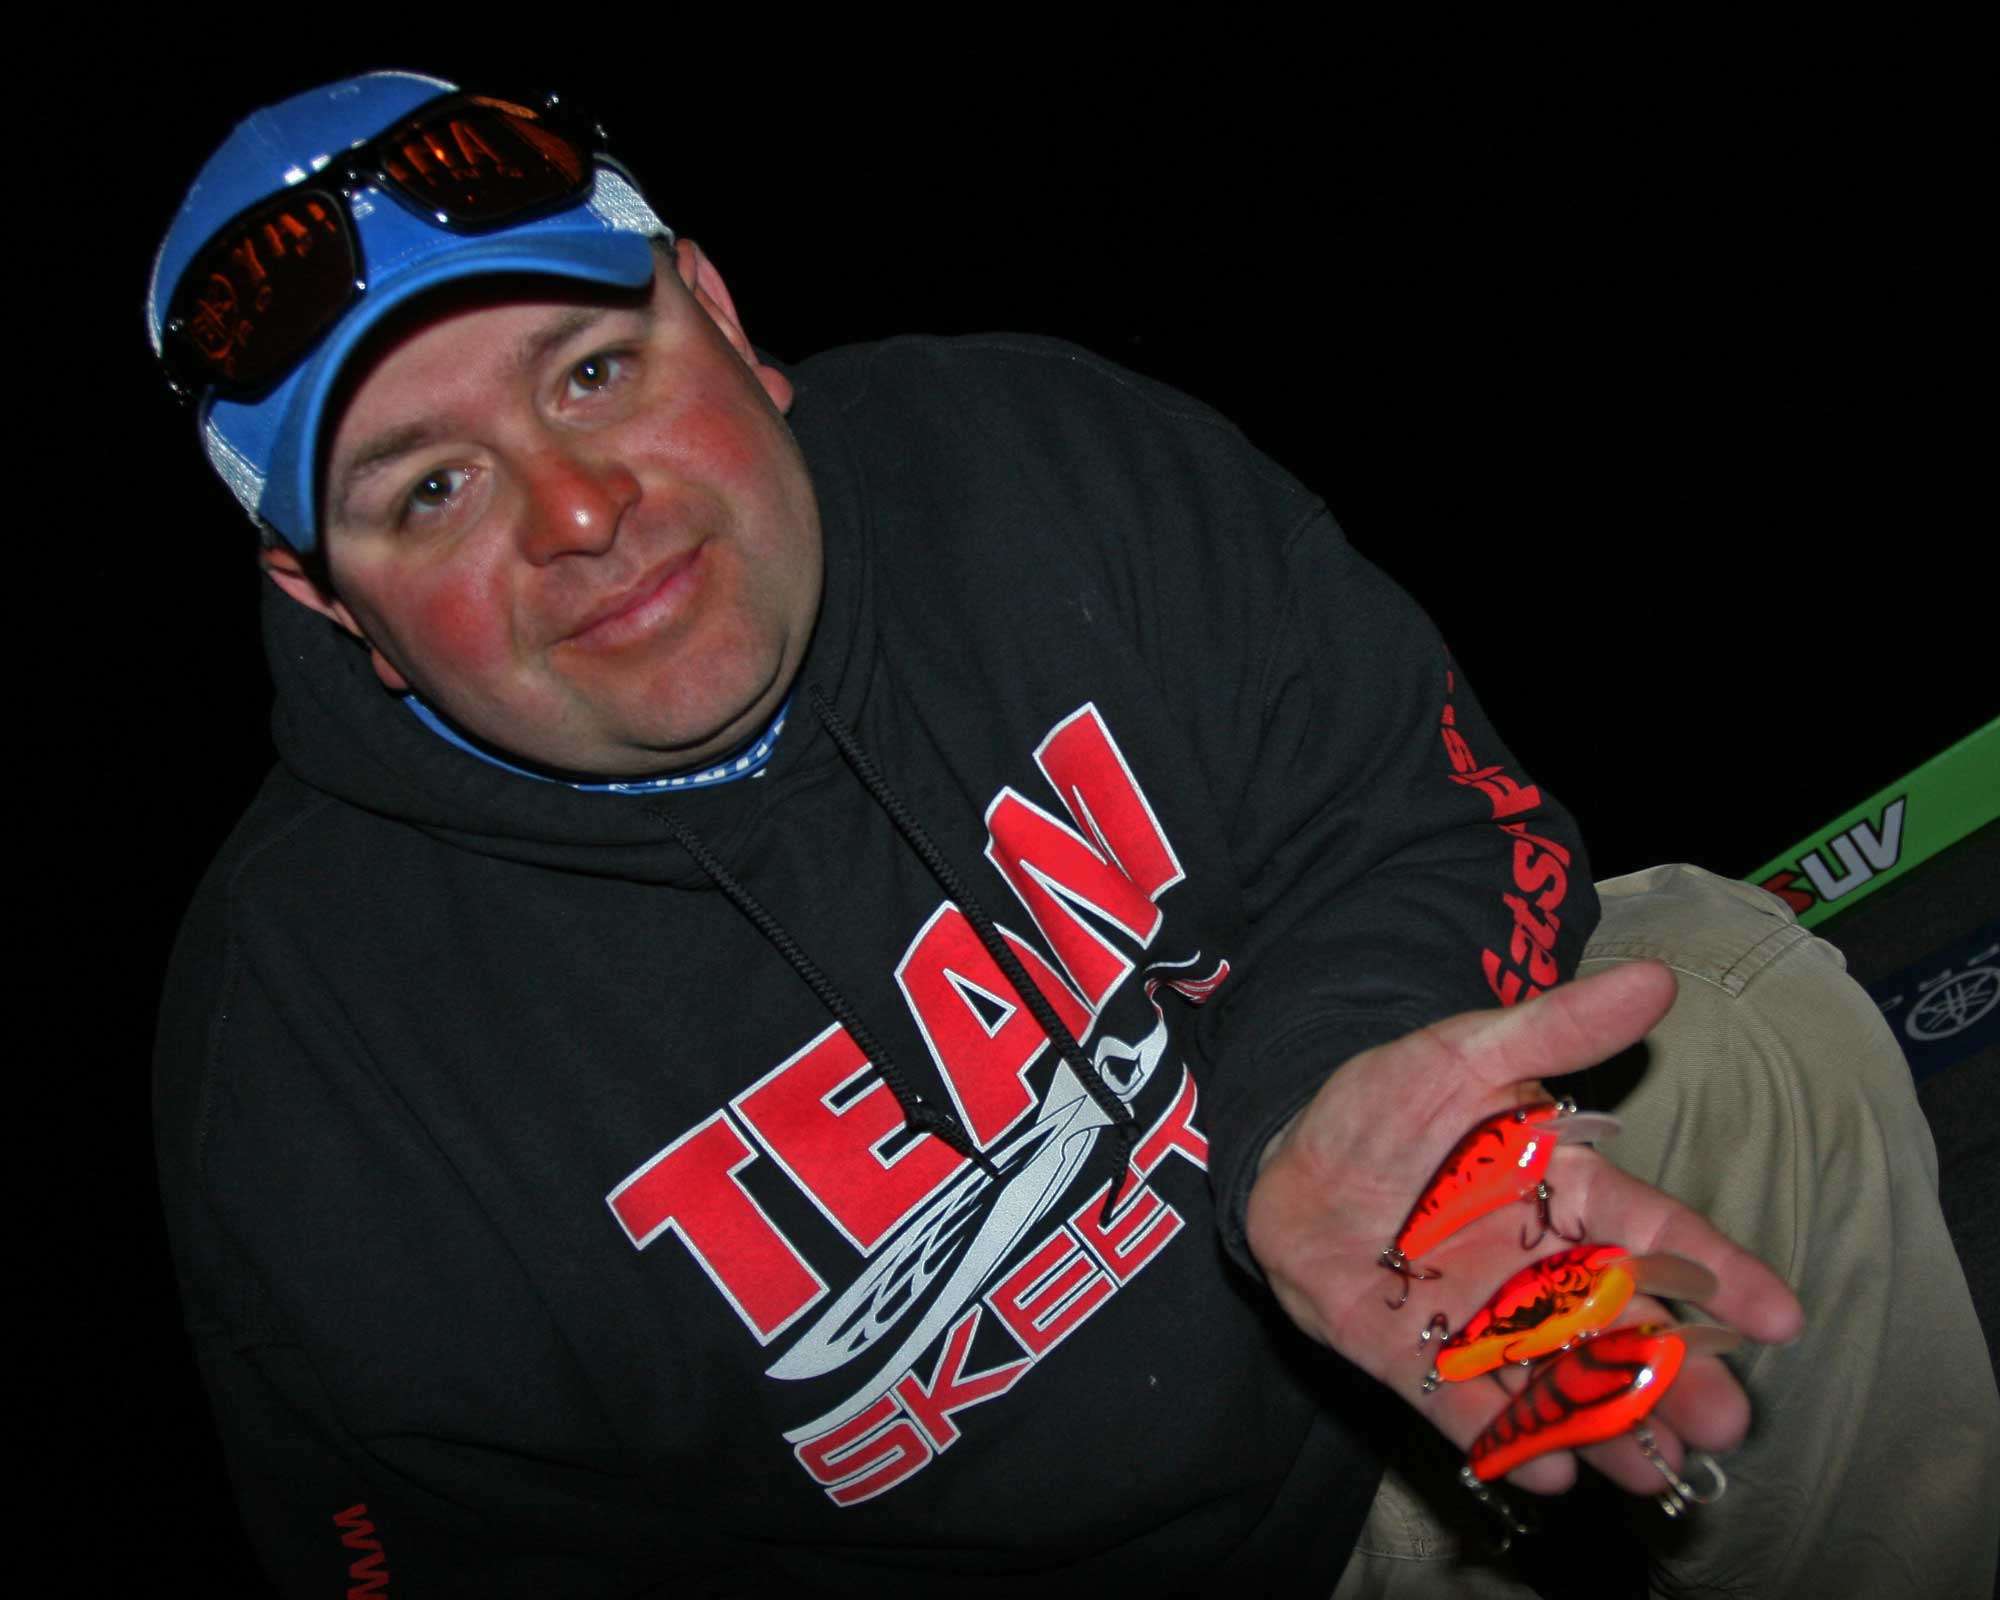 Bill Lowen mixed in three flat-sided crankbaits to jump into the Top 12 for the event. His main lures consisted of a Lazer Lure, Ima Shaker and a PH custom crankbait. Crawfish was his favorite color to use while he also mixed in some shad patterns as well.